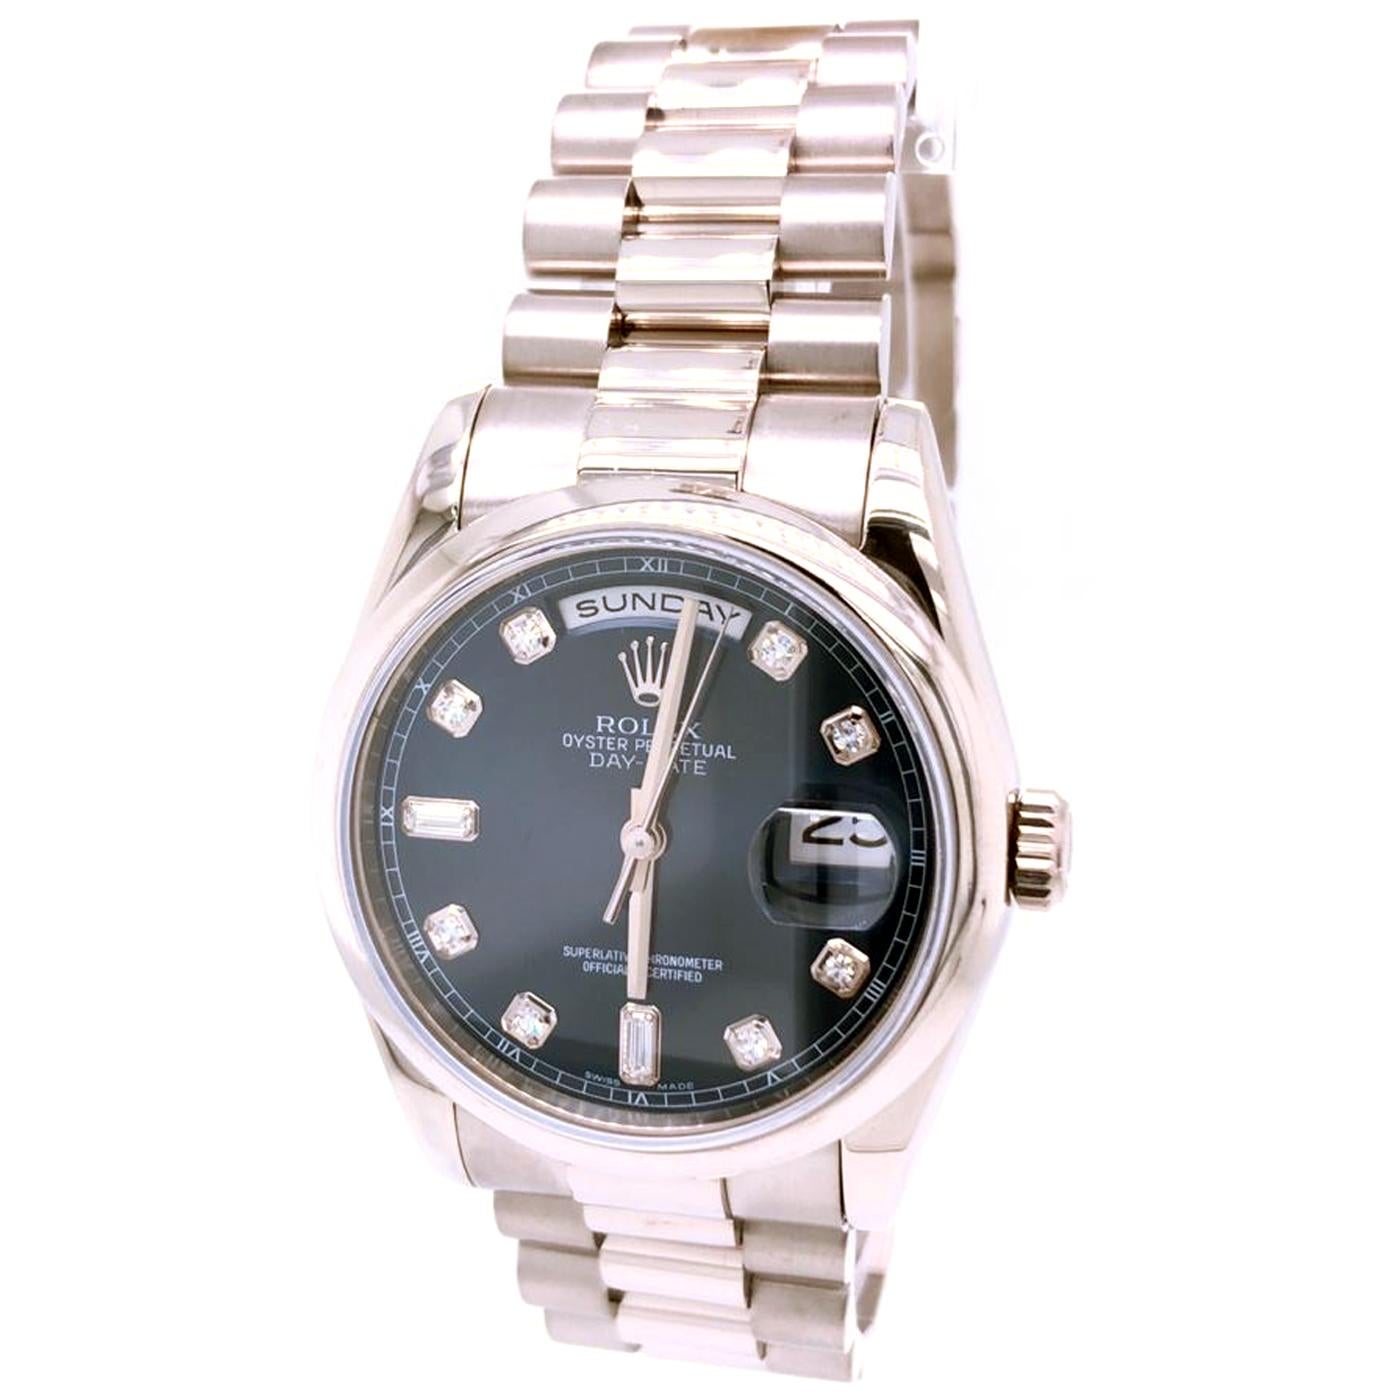 This Rolex Day-Date White Gold Diamond Automatic Bracelet Oyster Case 36mm case height 12mm. Blue/black gradient dial with 8 brilliant hour markers and 2 diamond baguettes at 6 and 9 o'clock and white gold hands and cranked minute track. Movement